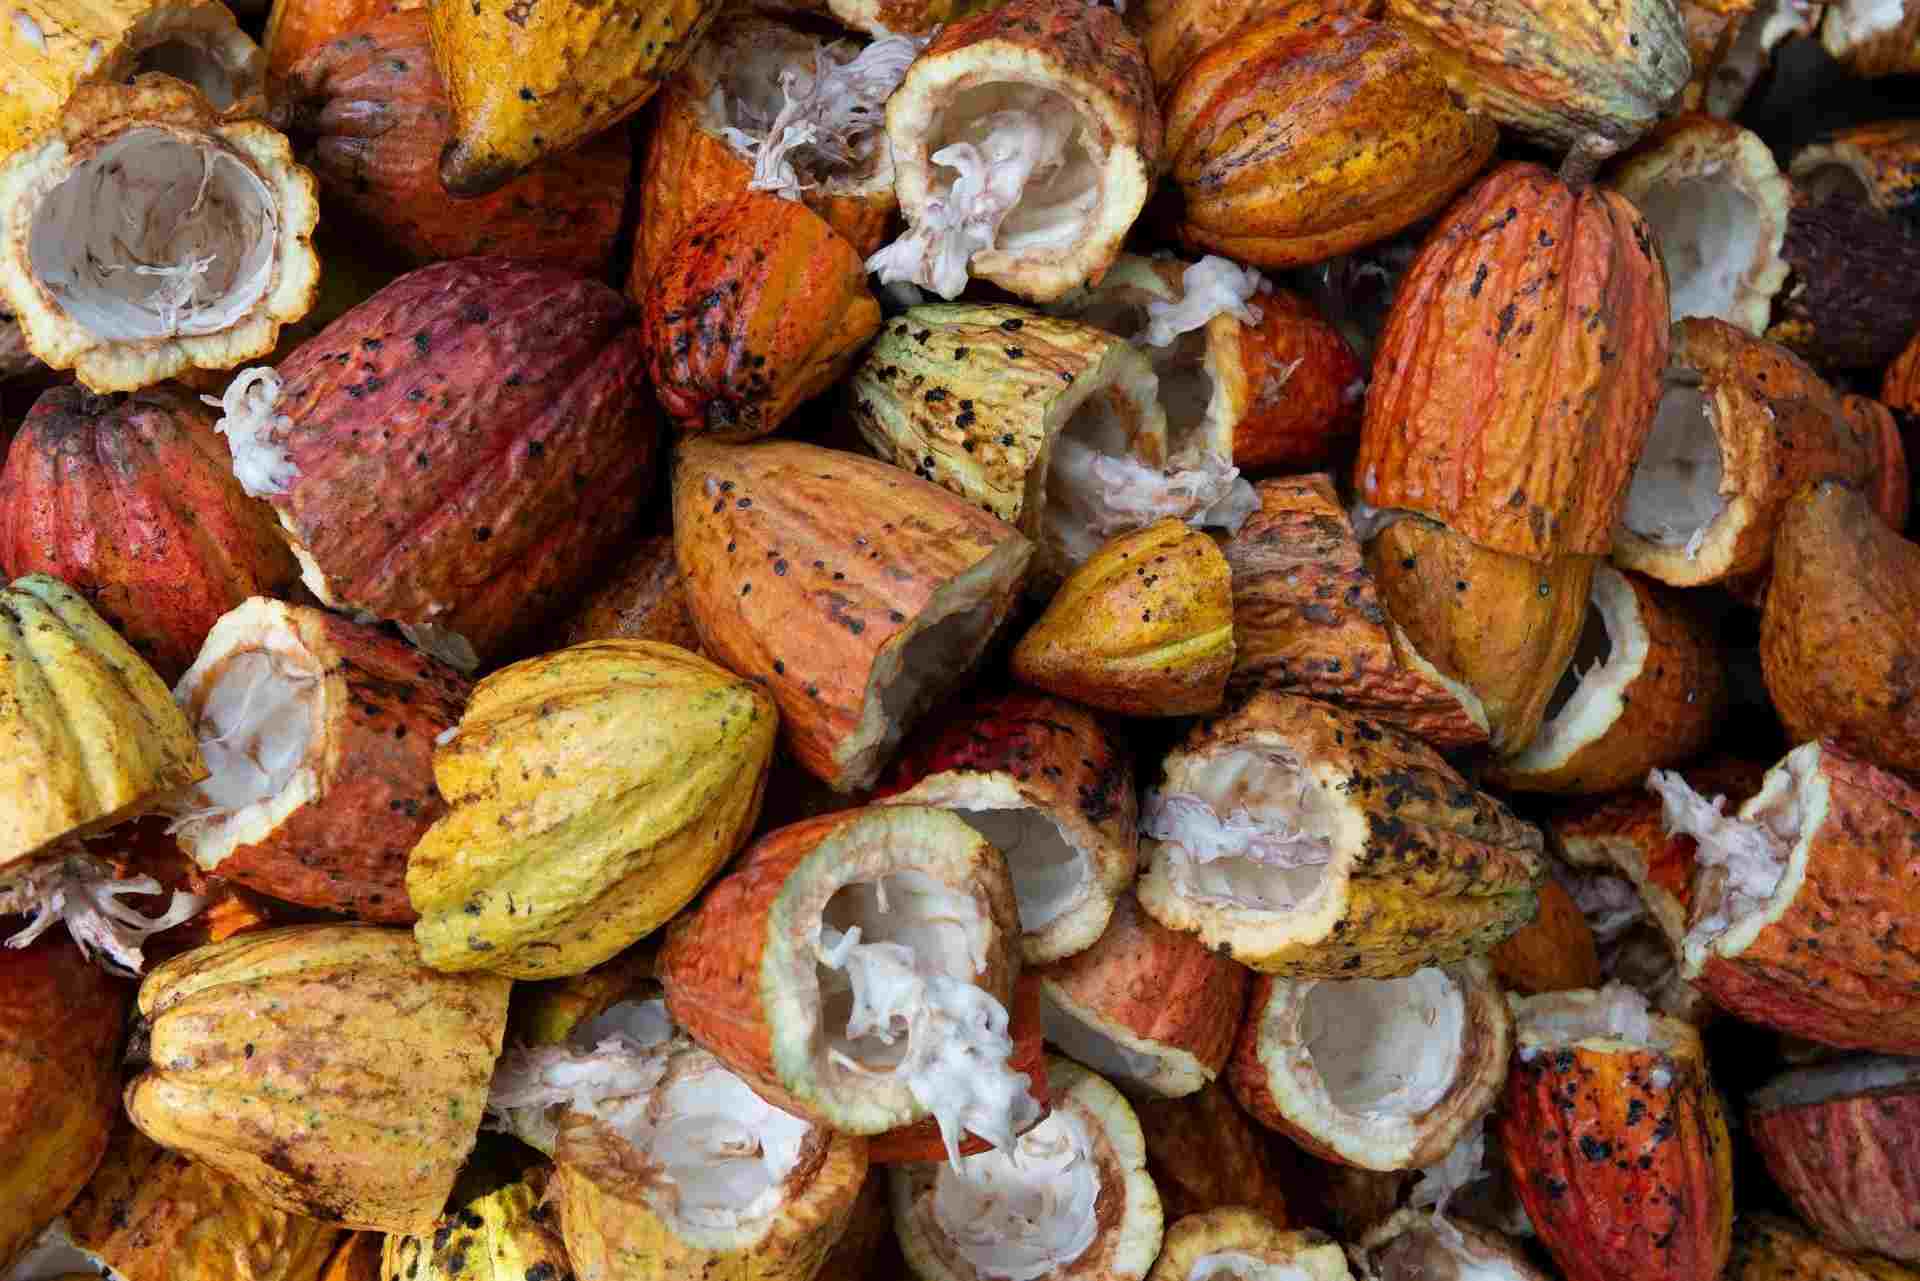 Several scientific classifications of cacao trees